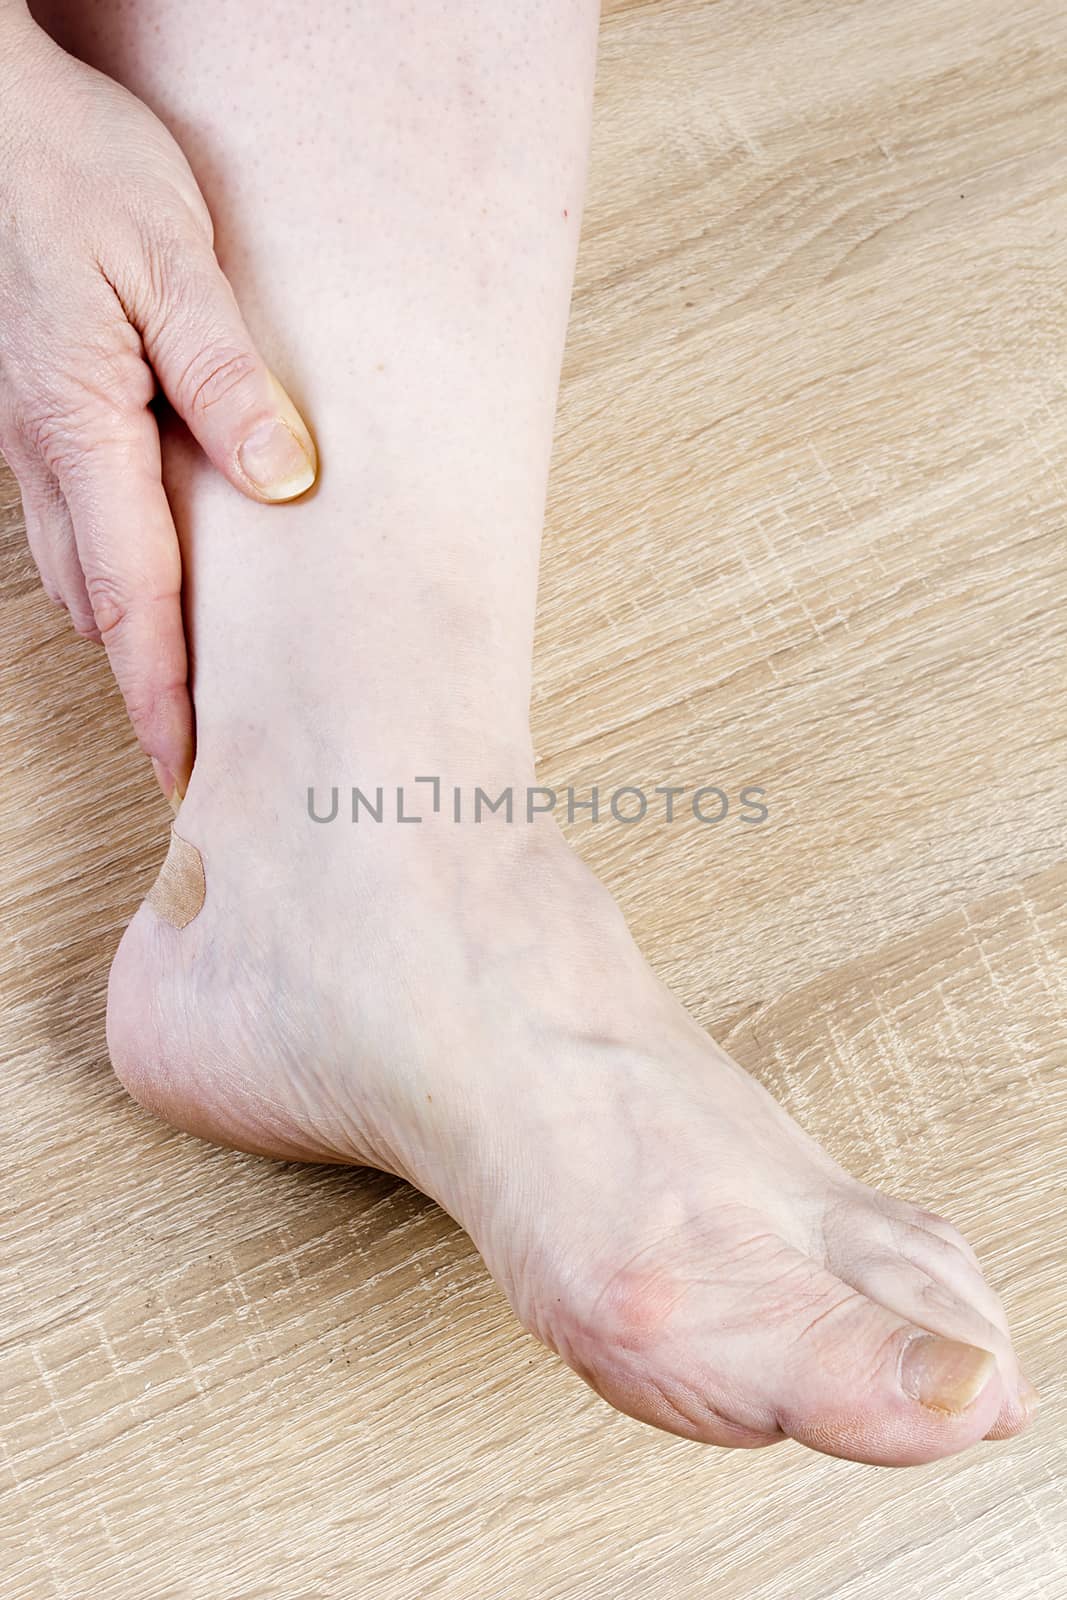 Female foot and hand close-up on a wooden background